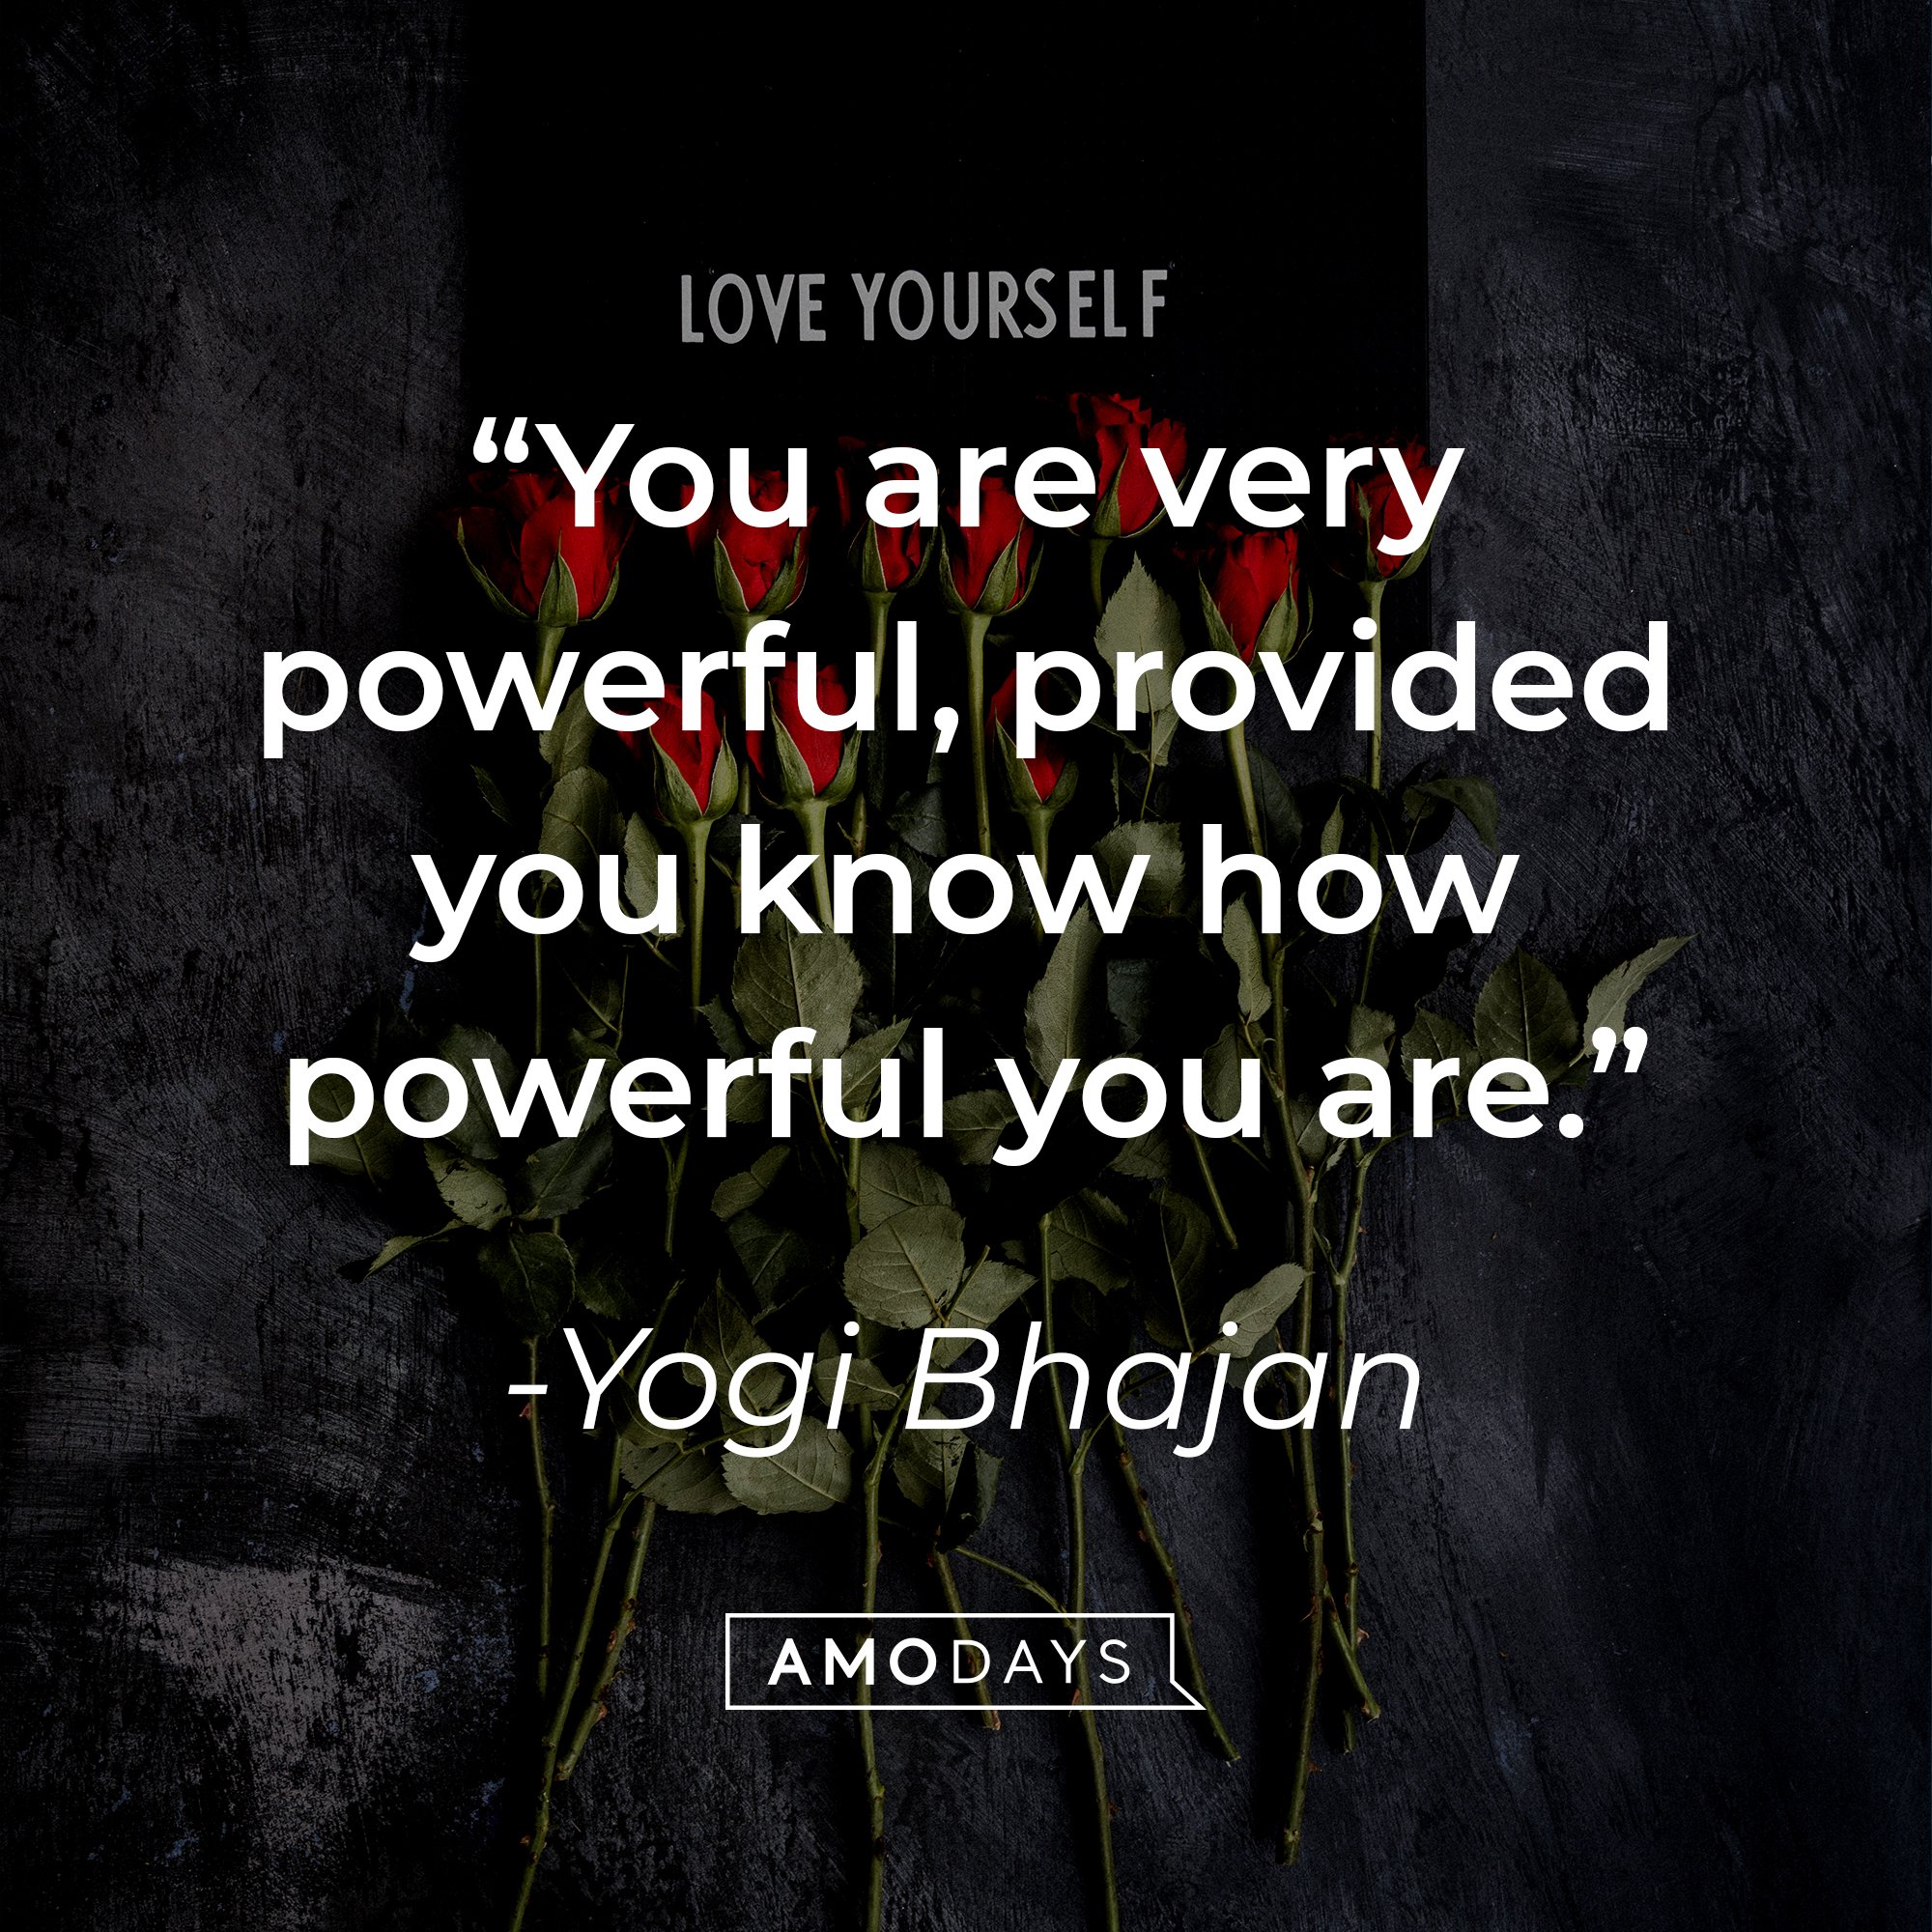 Yogi Bhajan's quote: “You are very powerful, provided you know how powerful you are.” | Images: AmoDays